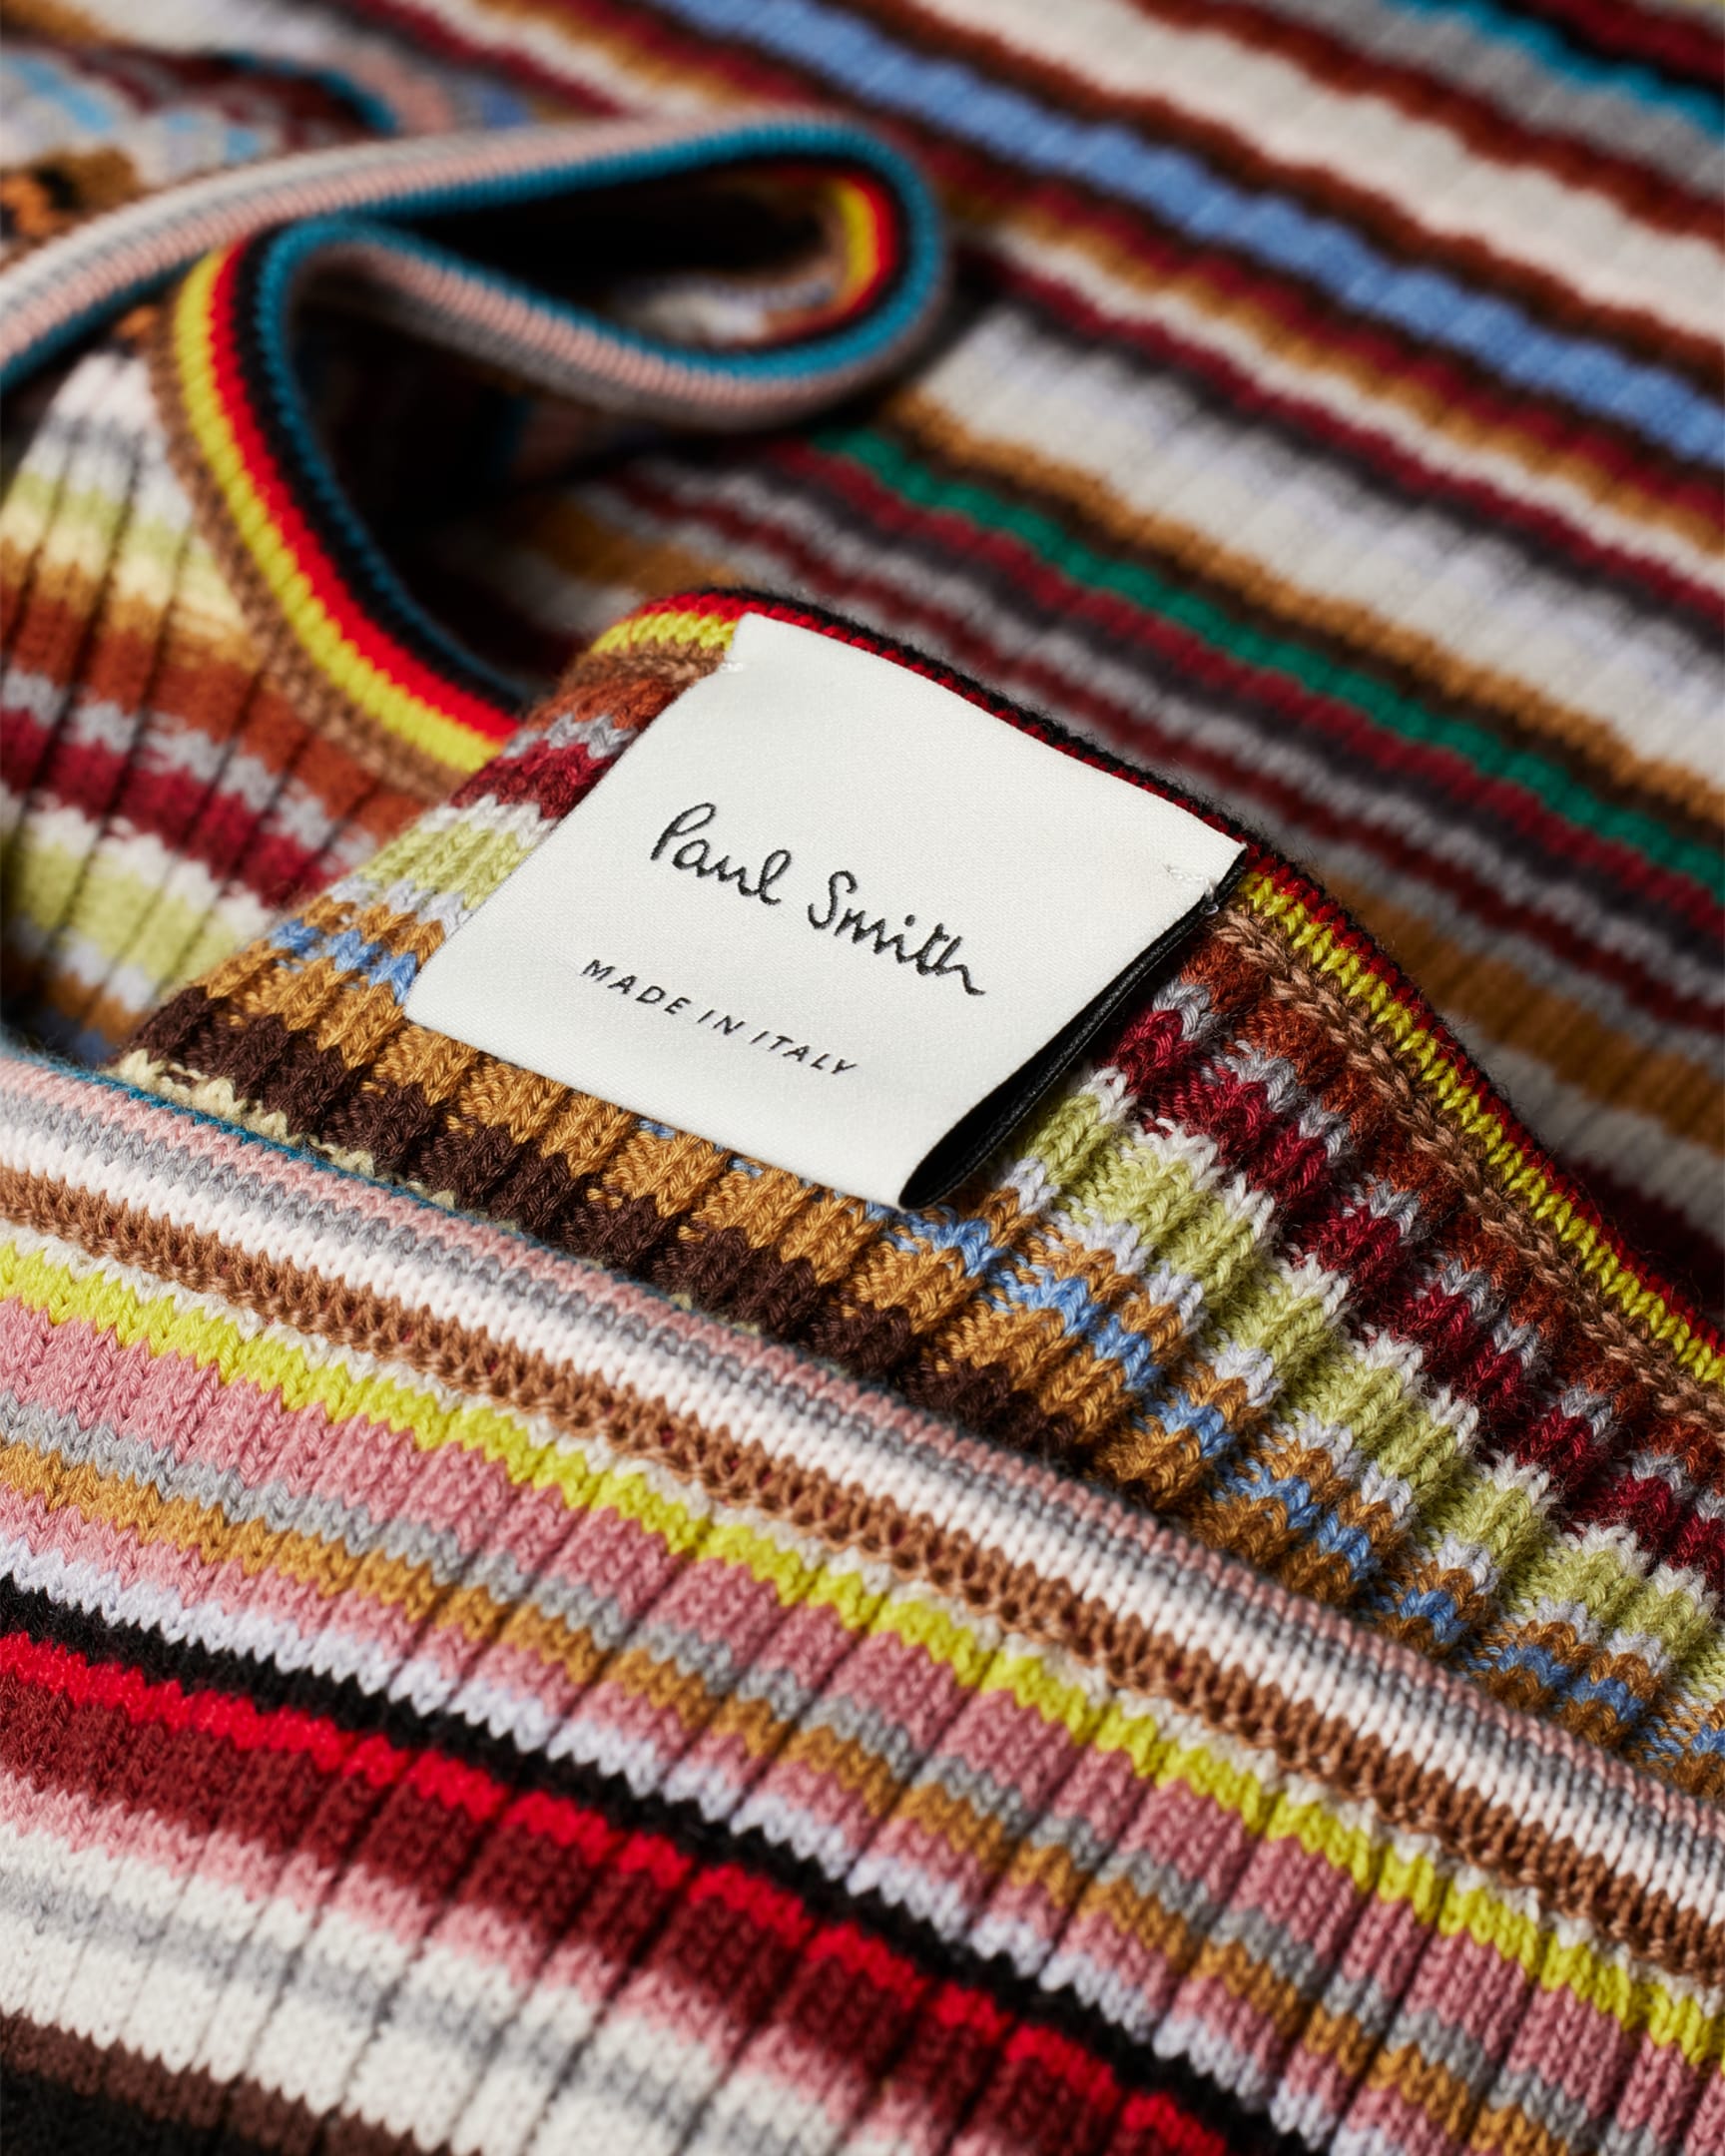 Detail View - Women's 'Signature Stripe' Knitted Dress Paul Smith